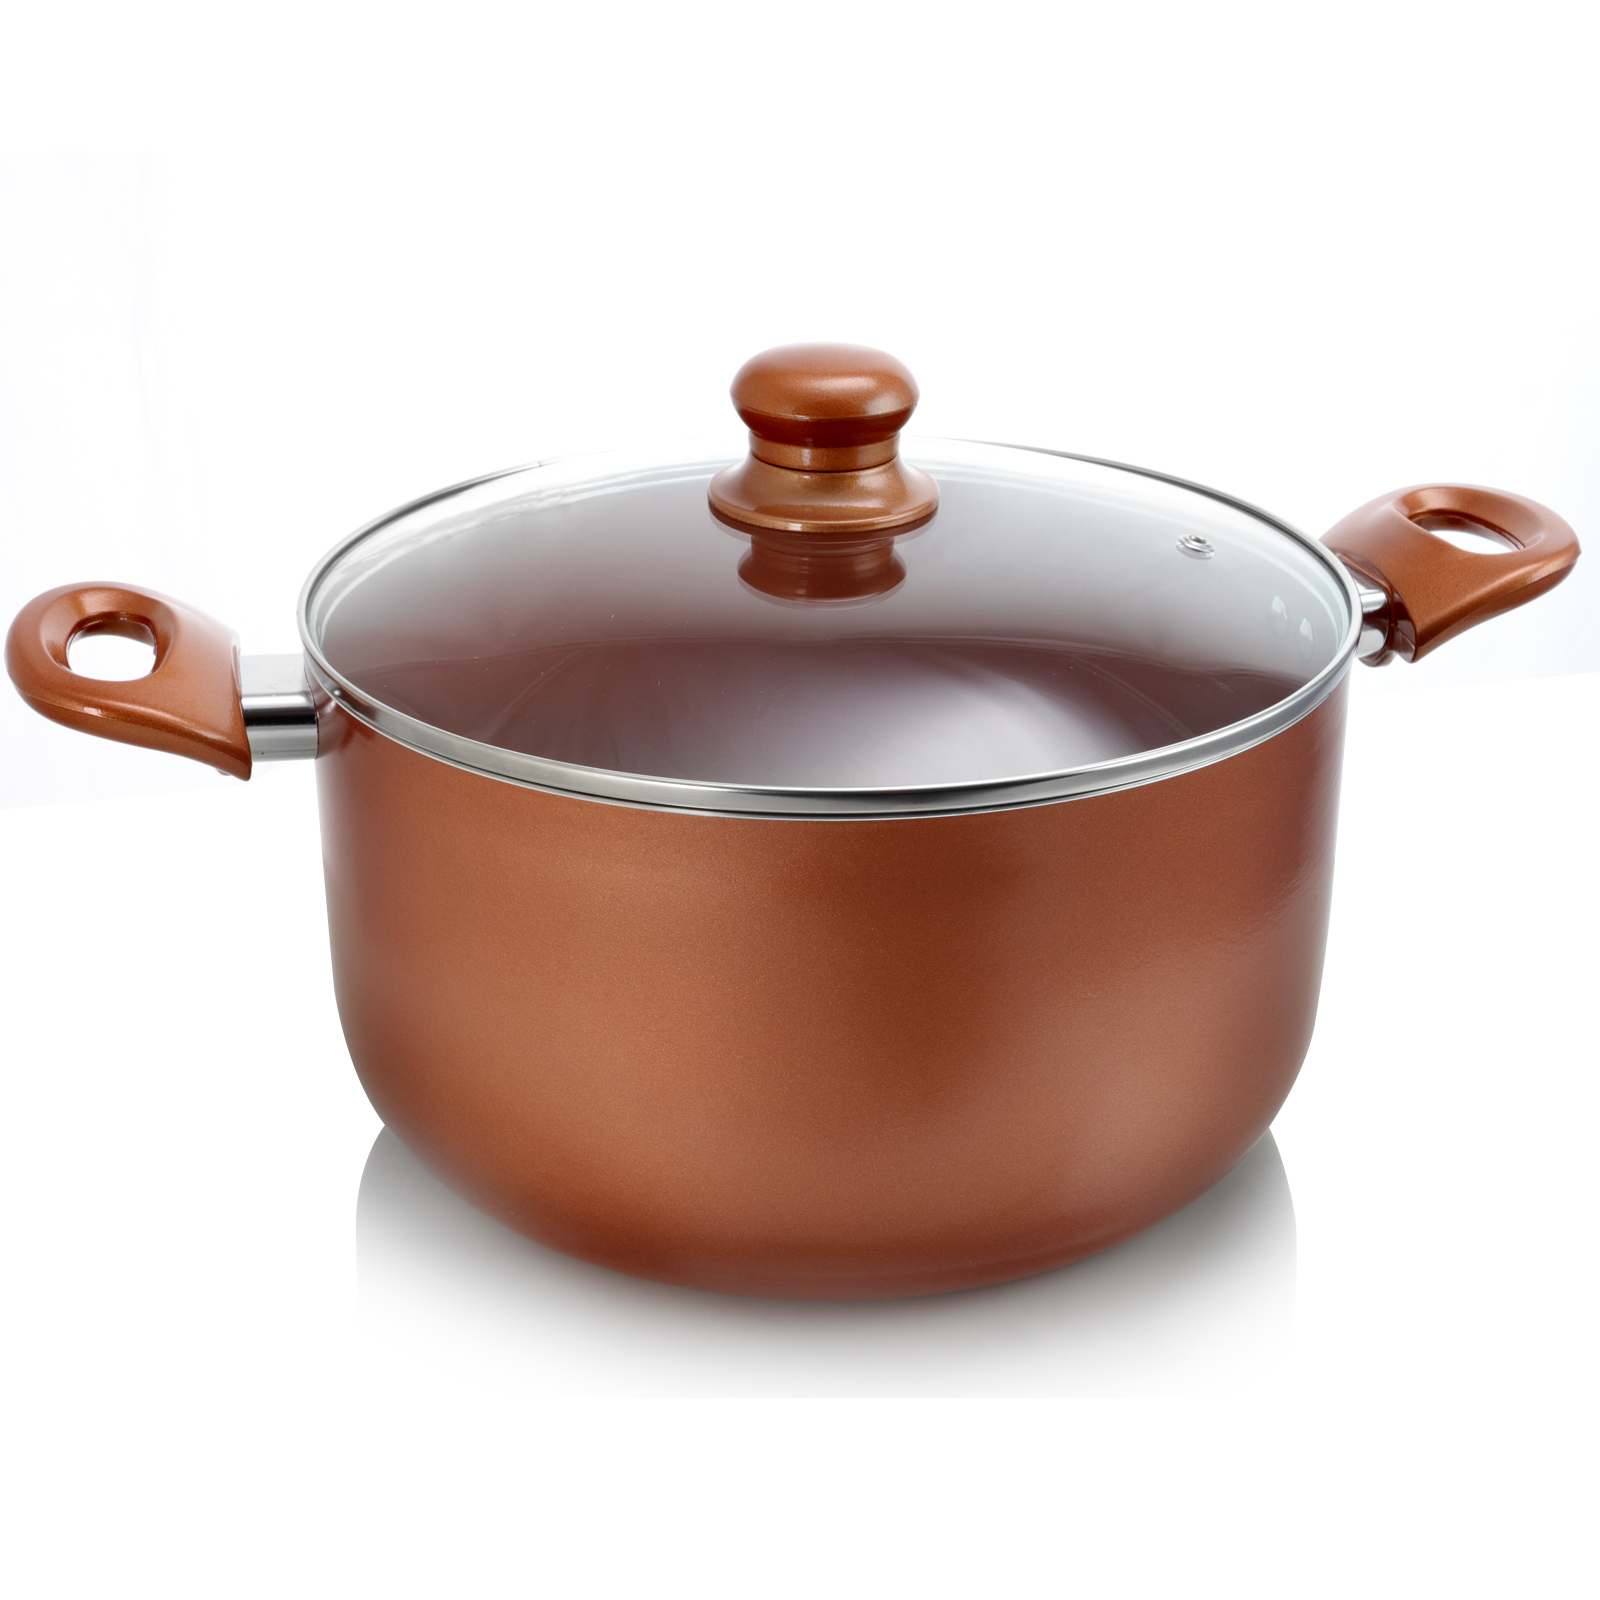 Better Chef  8 Qt. Copper Colored Ceramic Coated Dutchoven with glass lid